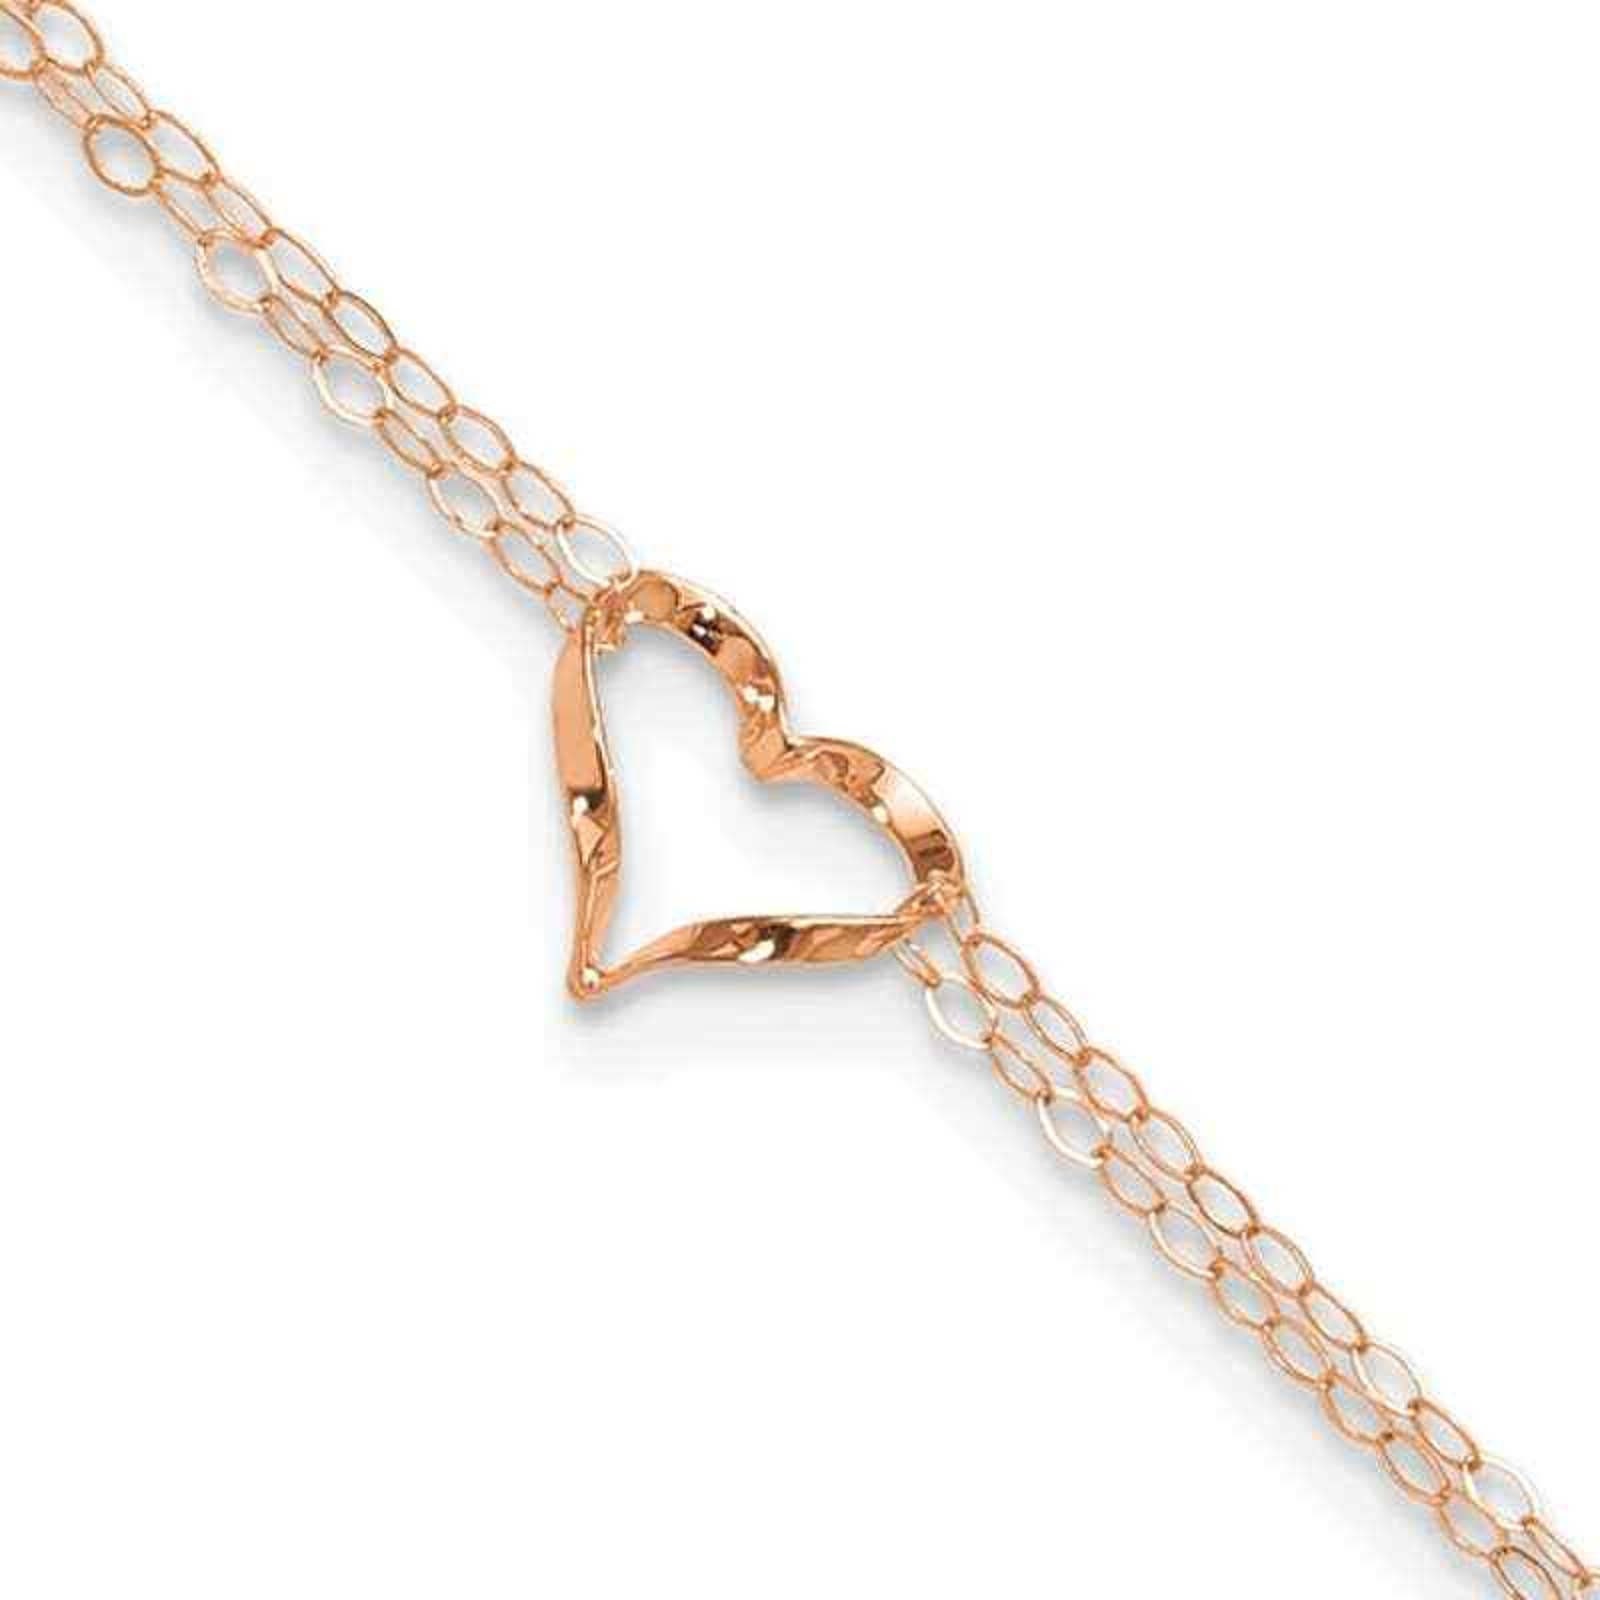 Lovelock 18ct Gold Cable Chain Charm Bracelet